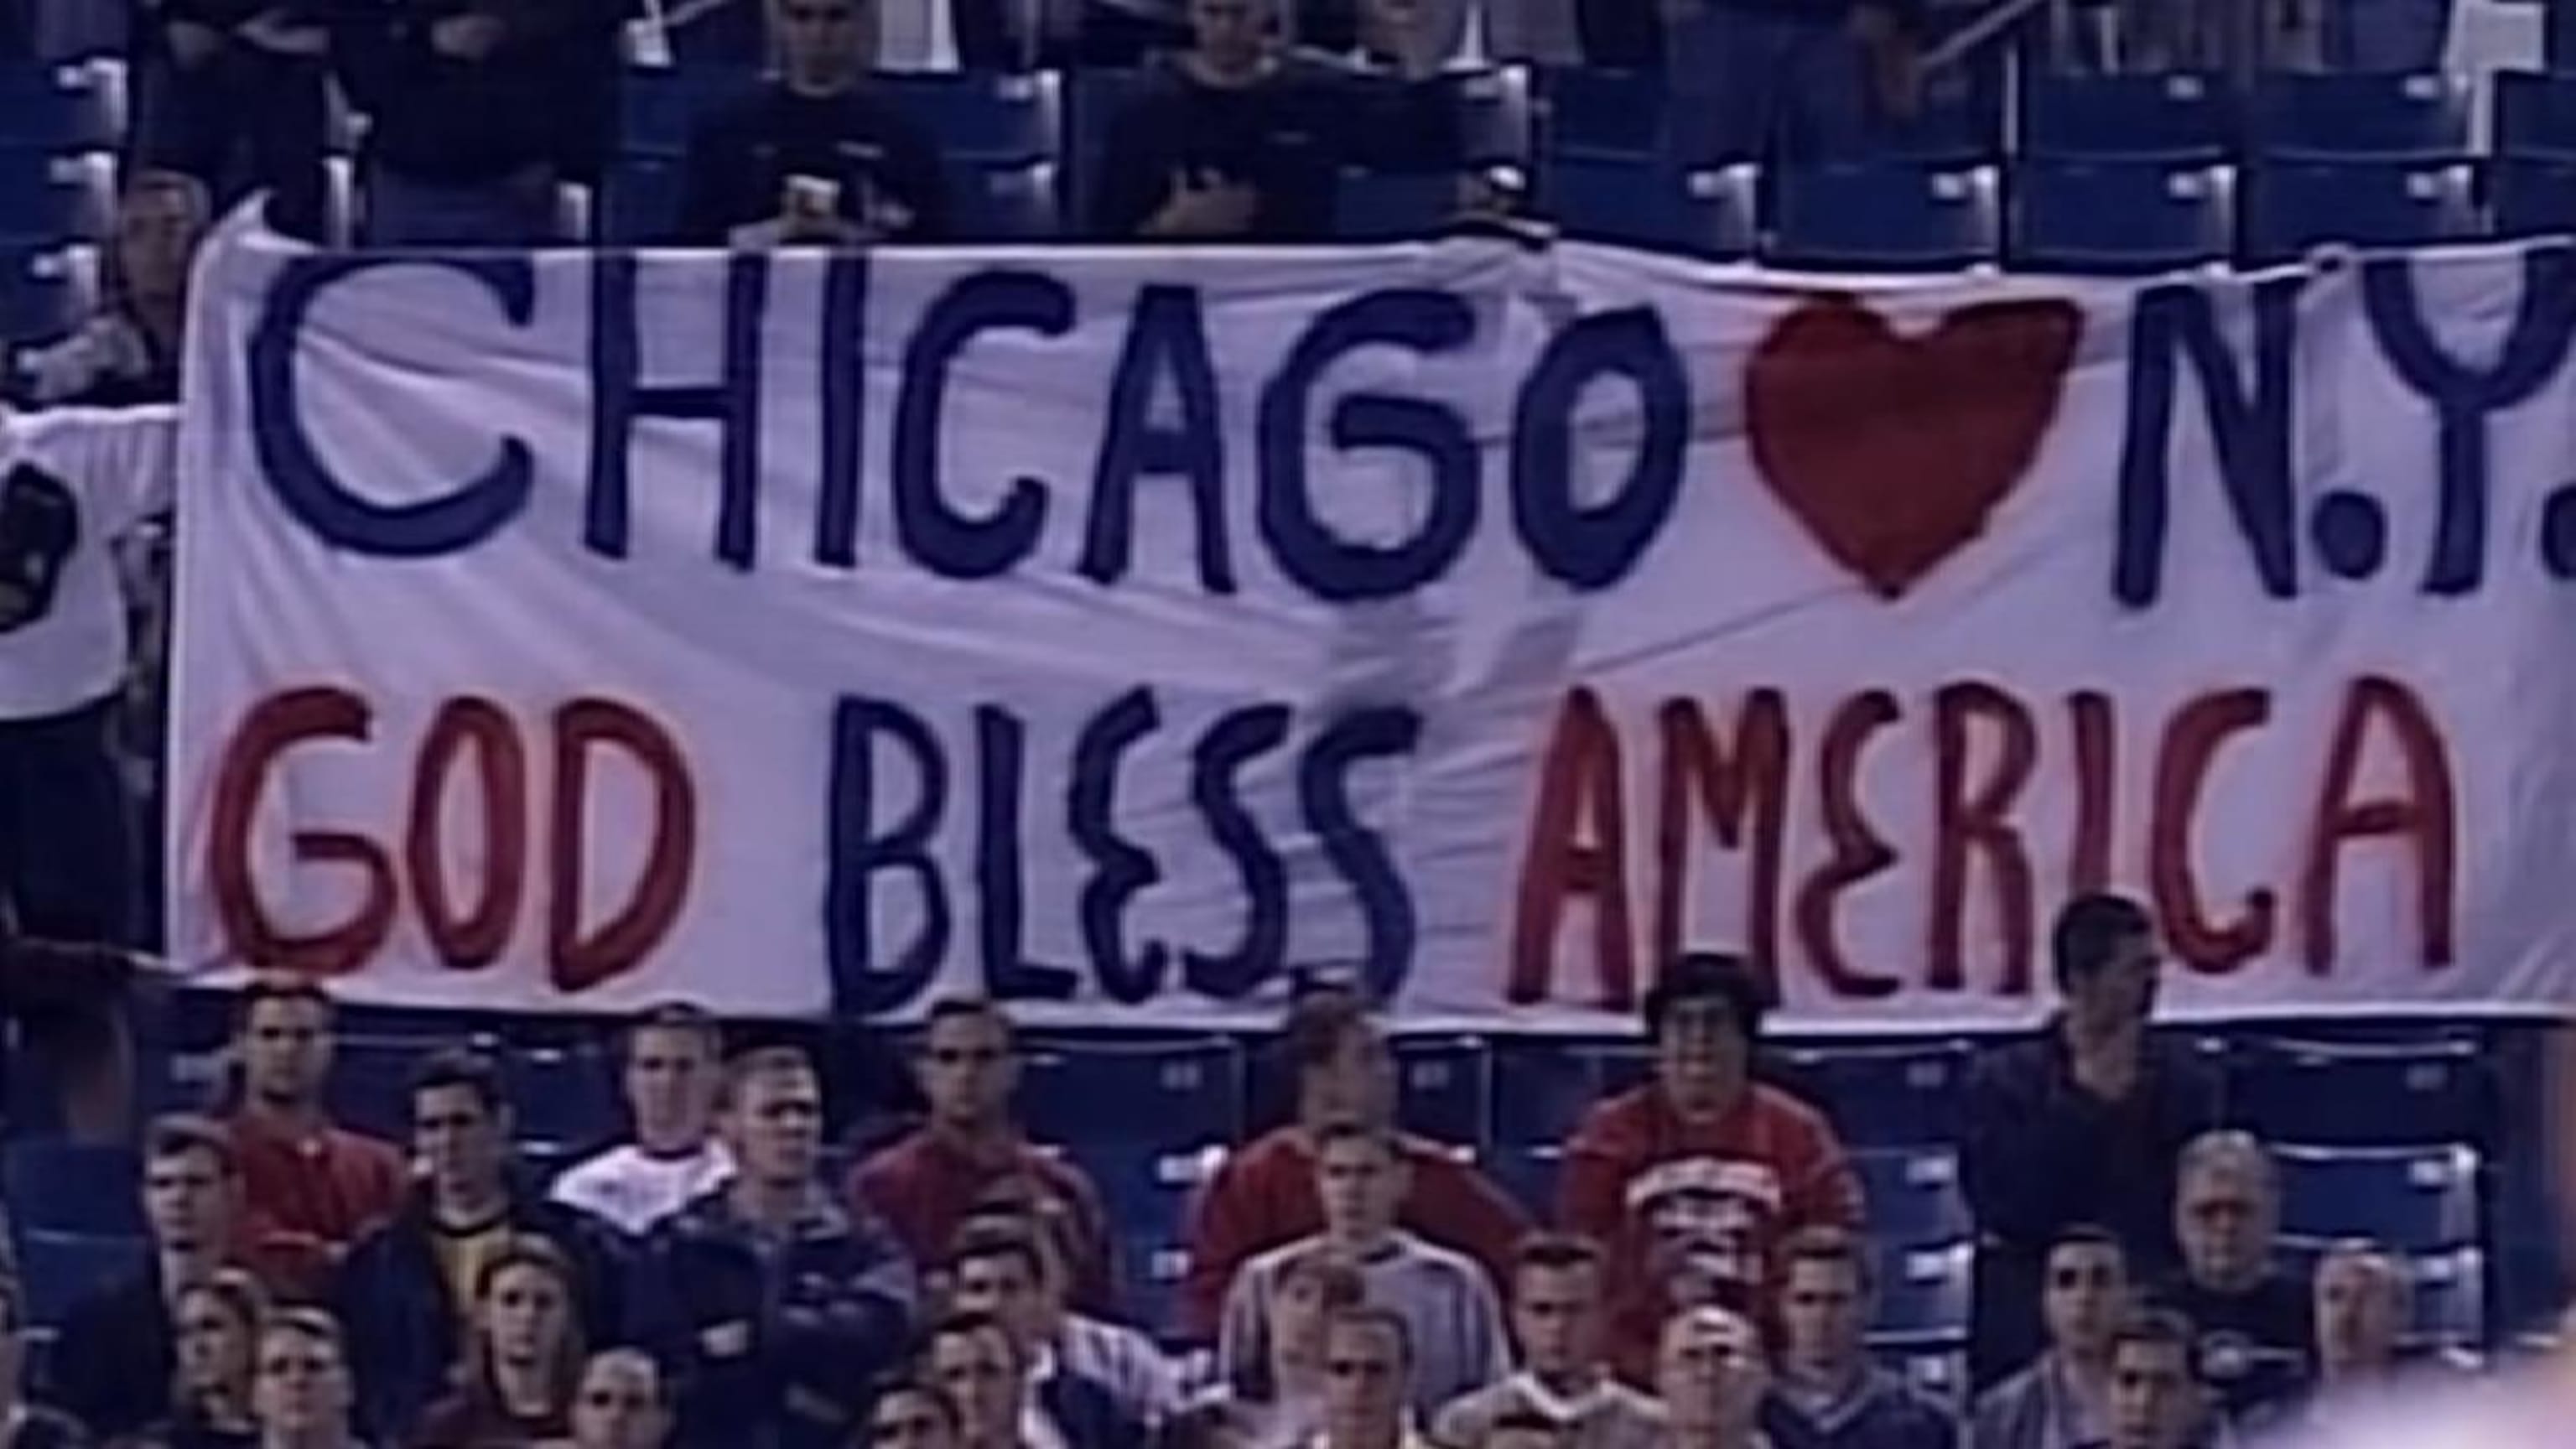 Decade after 9/11, 'God Bless America' still part of baseball experience 